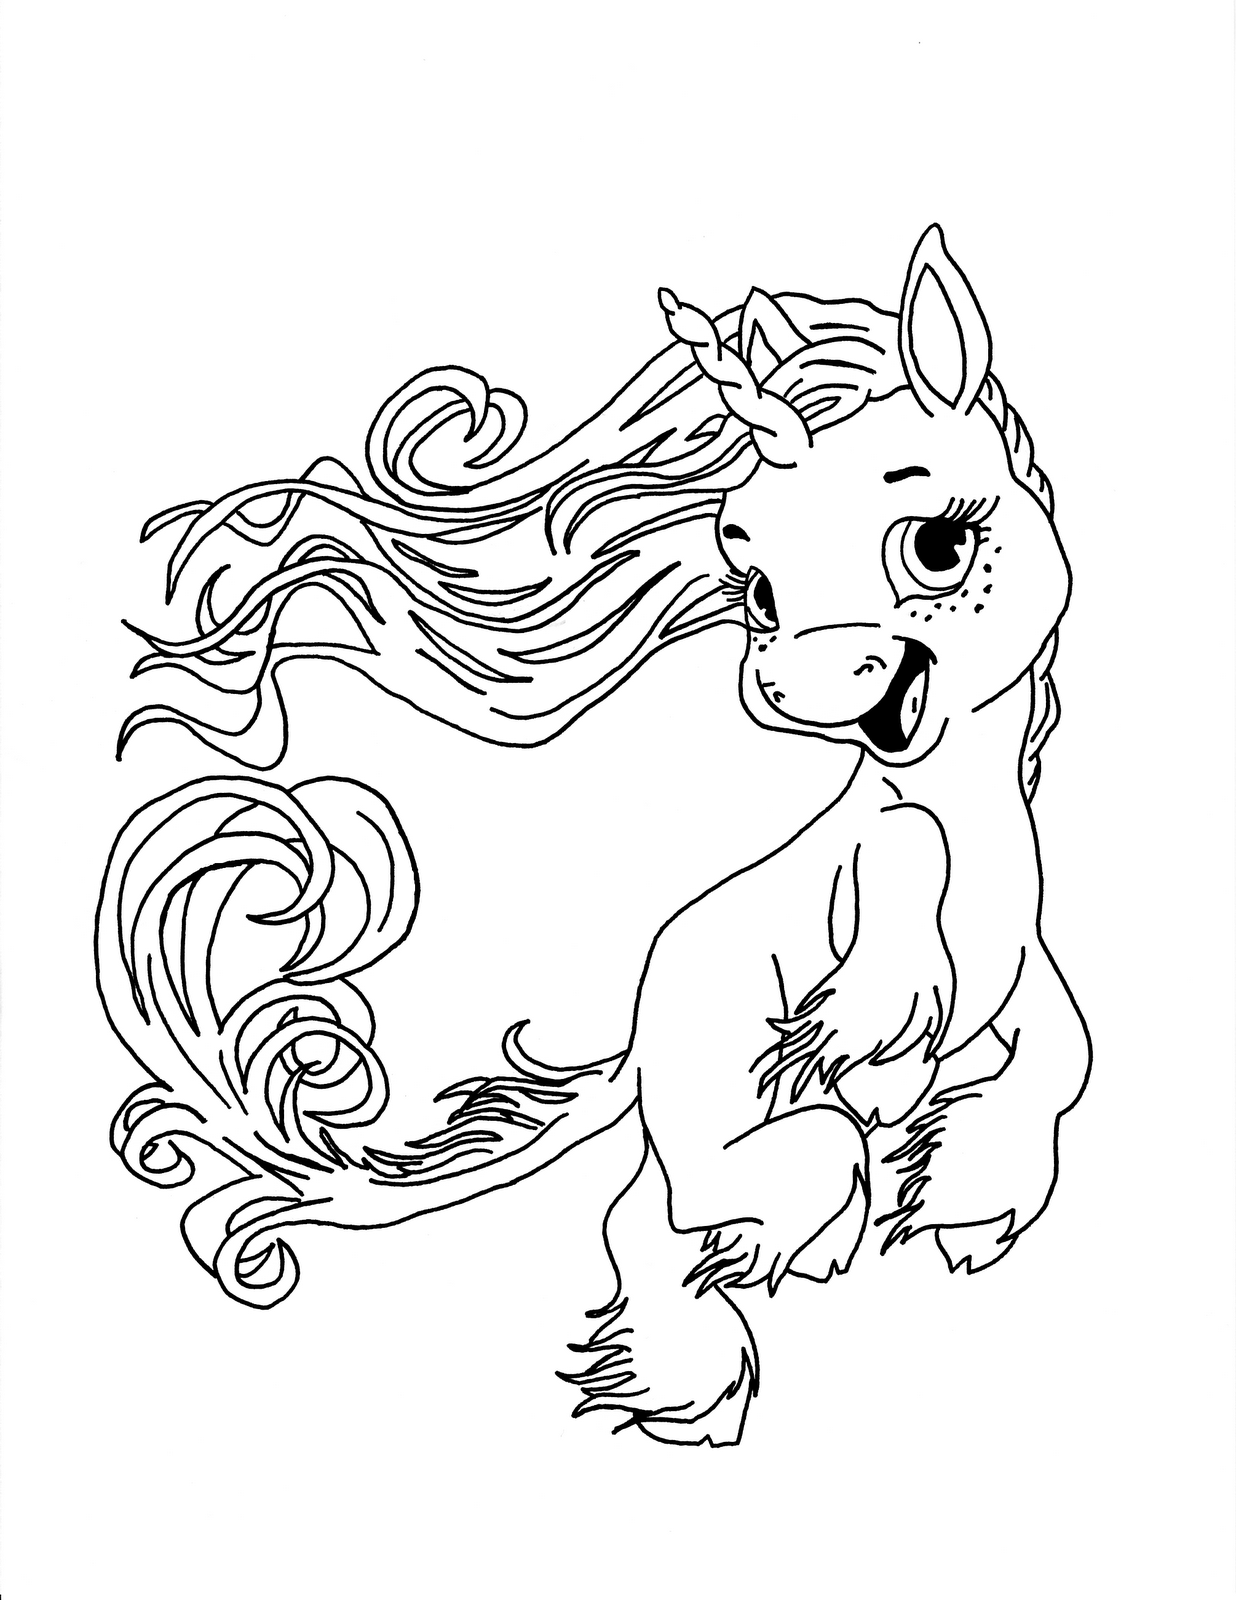 unicorn coloring pages pdf at getcoloringscom free